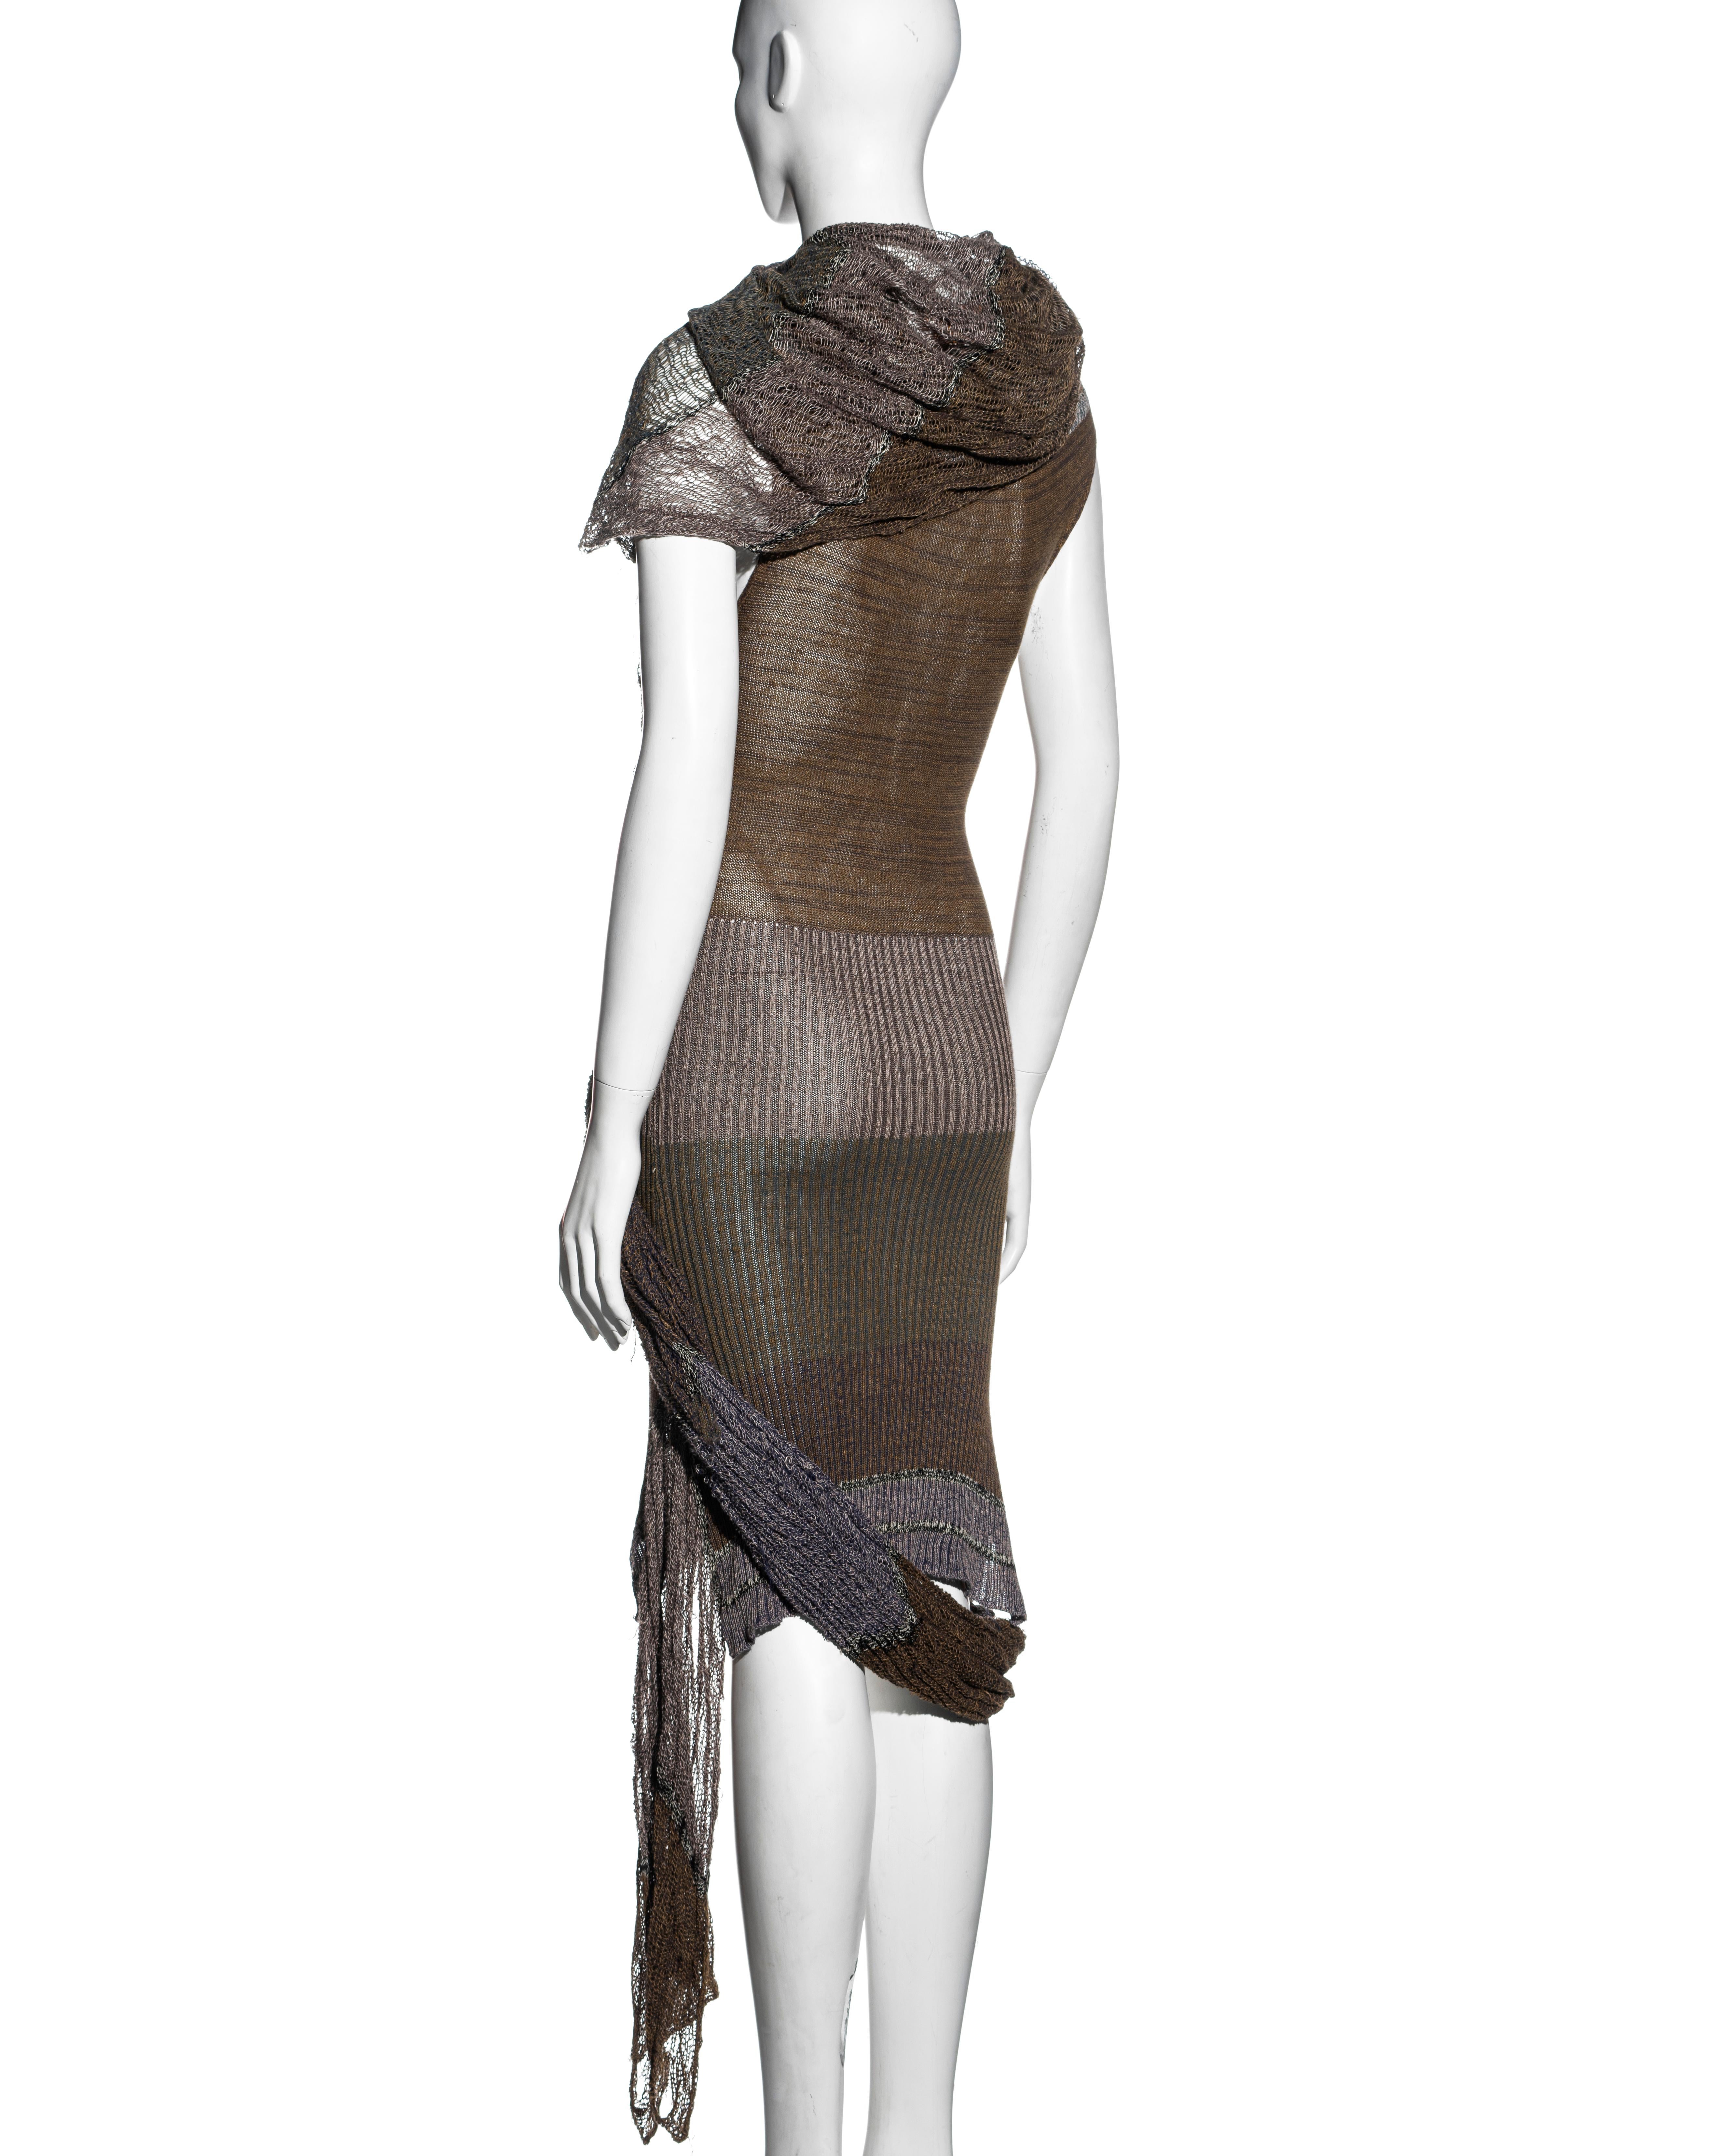 Vivienne Westwood striped open knit dress with tubular scarf, ss 2005 For Sale 2